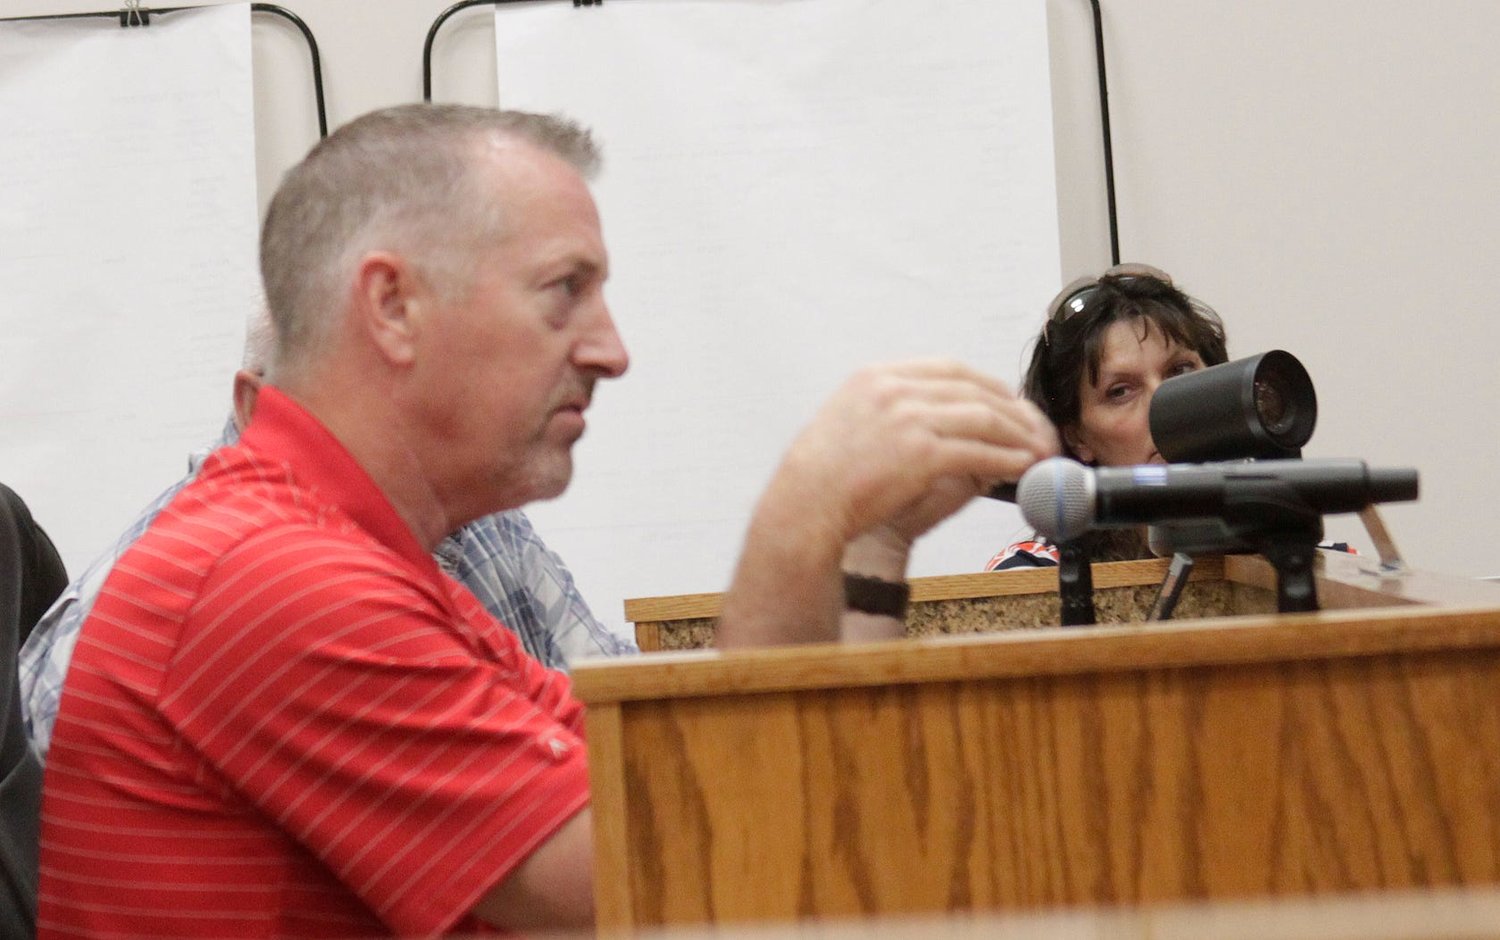 Moberly Community Development Director Tom Sanders responds to questions from the city council during a June 21 business meeting held at City Hall.